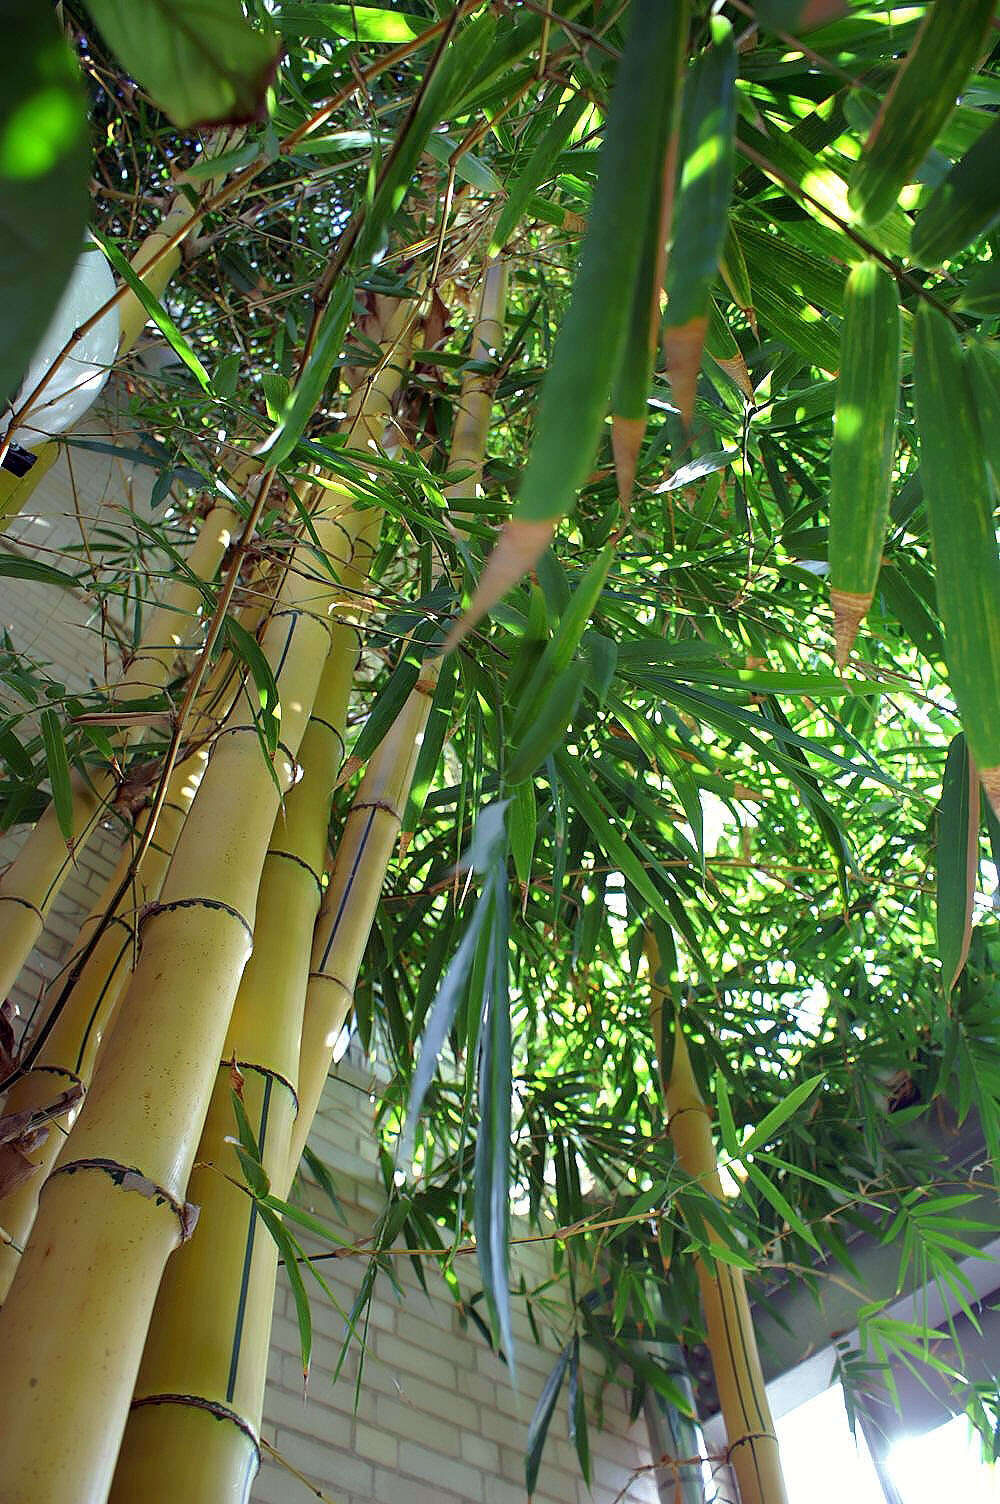 Image of common bamboo